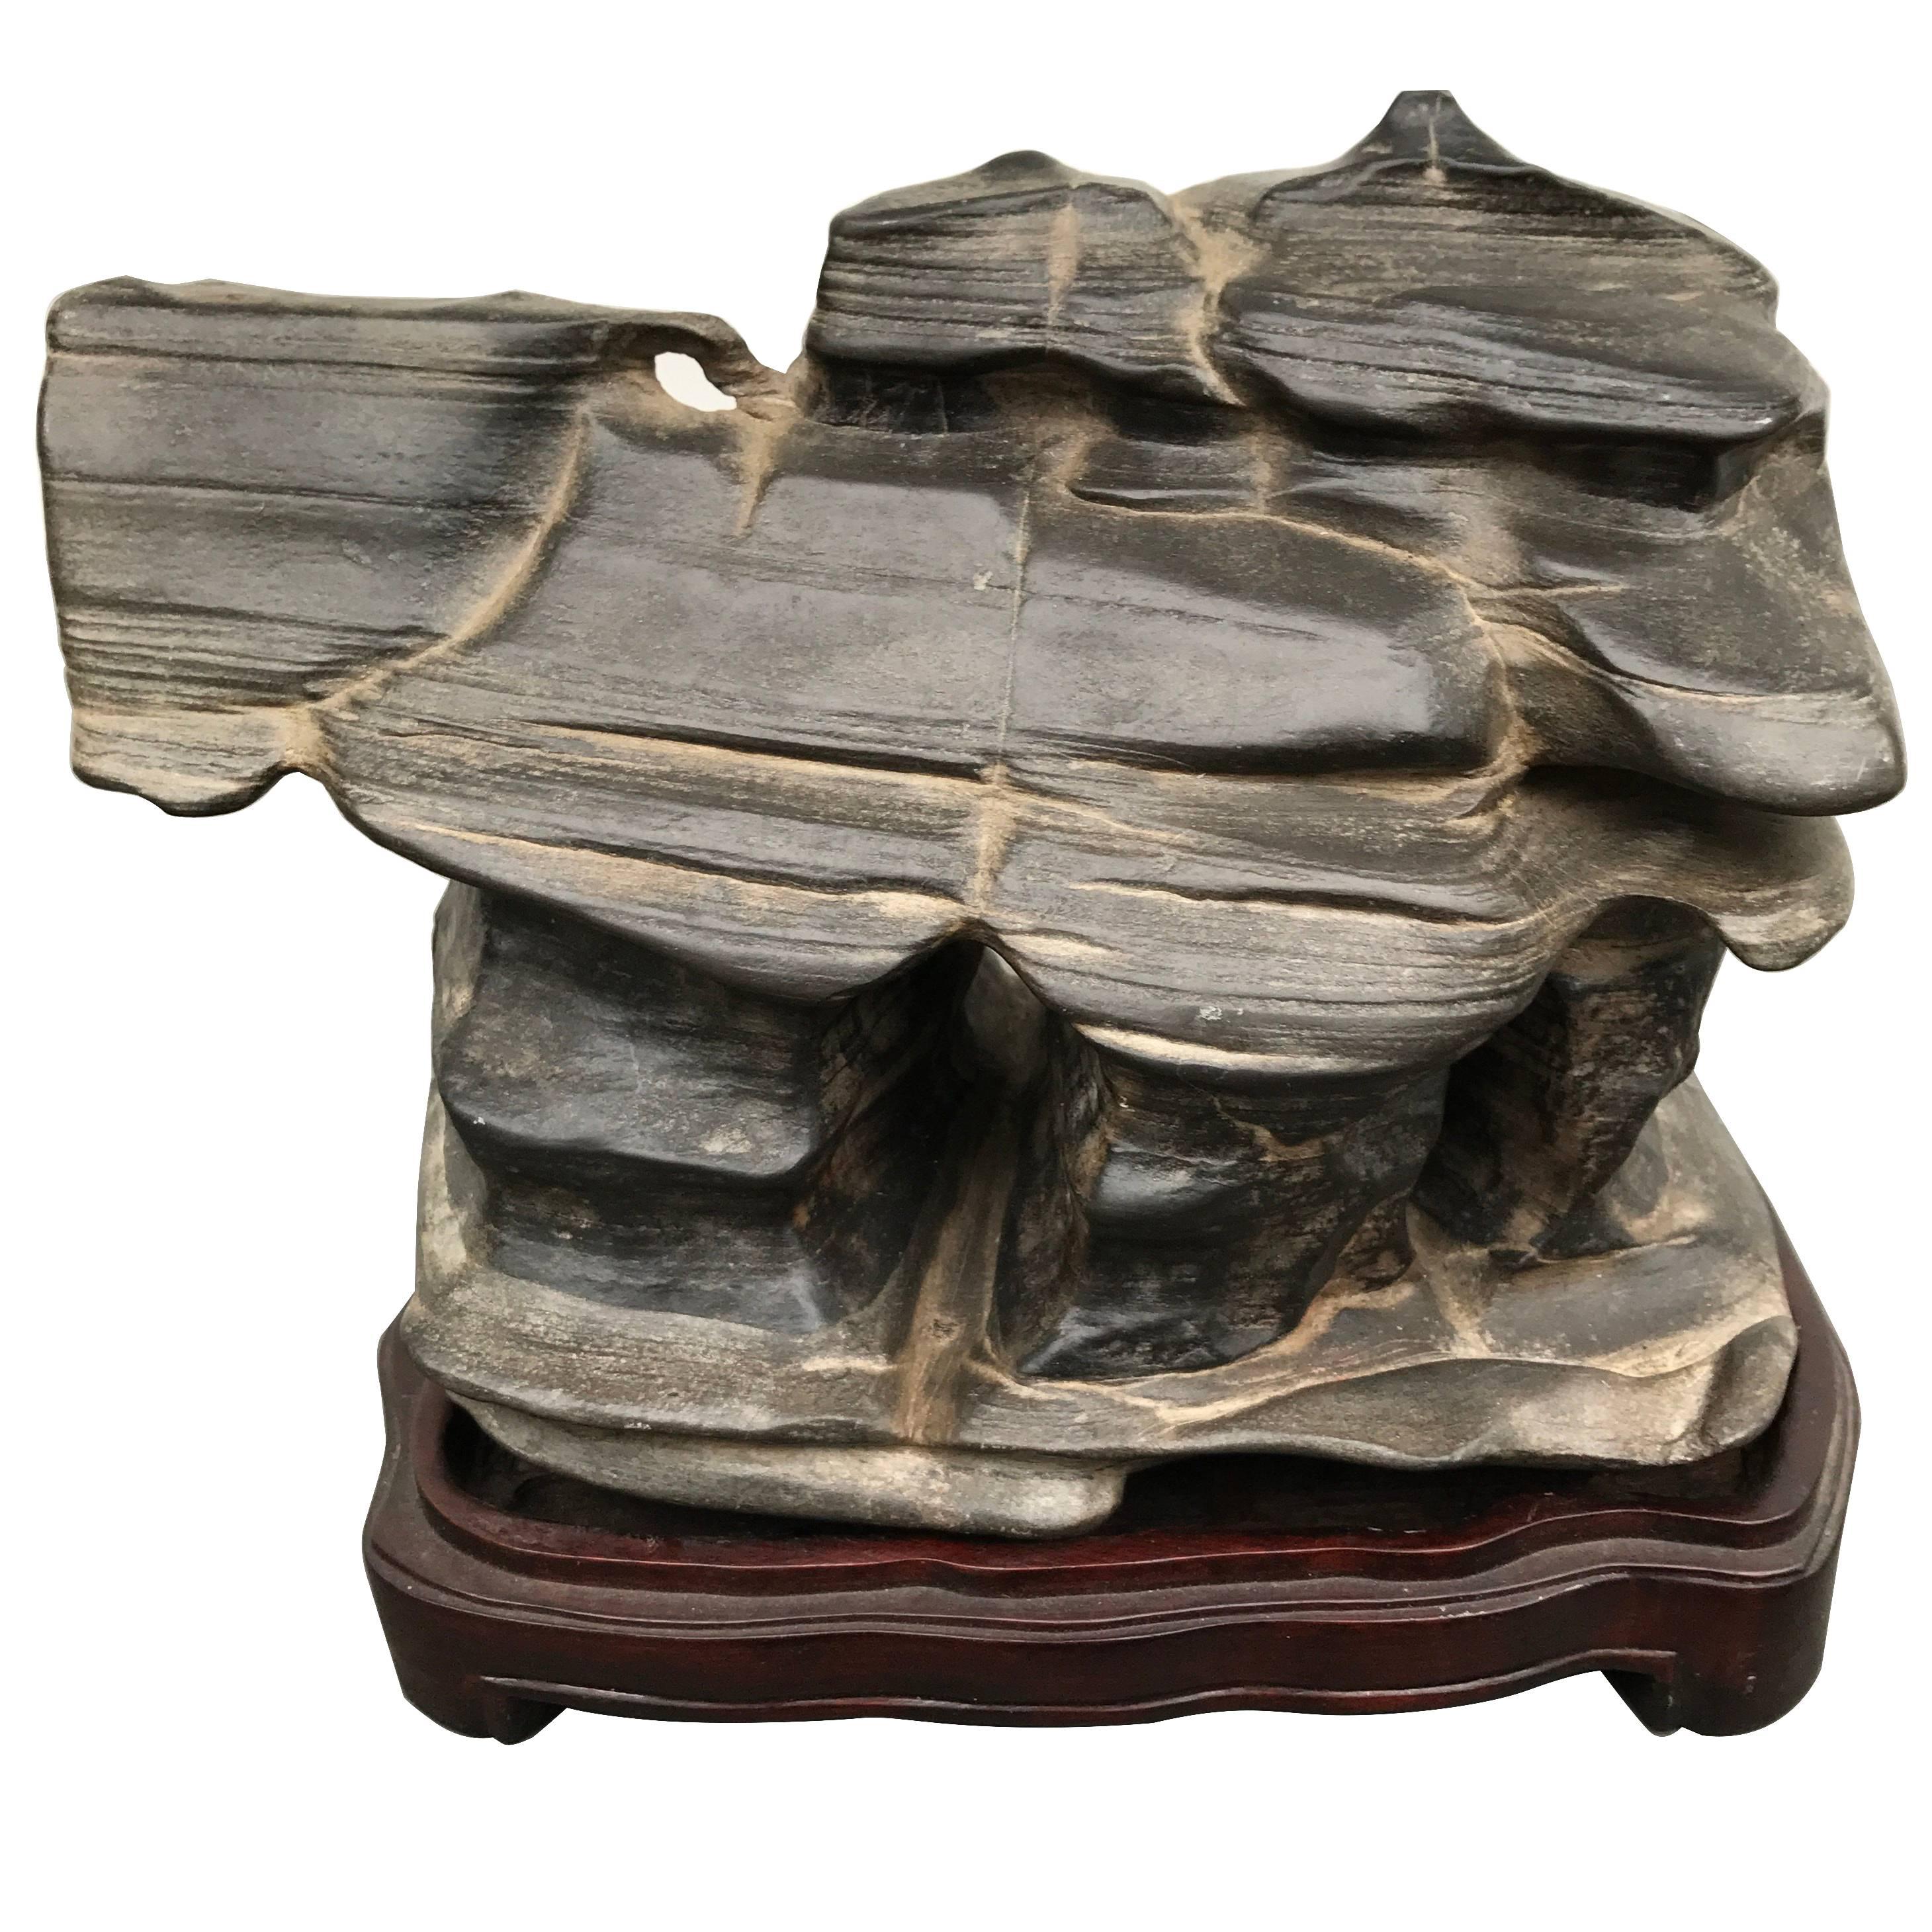 This is a beautiful example of a unique, natural organic Chinese, Wuling- Viewing stone or scholar rock in the form of a surreal architectural structure.

Notice its smooth natural wavy appearance caused from natural earth forces taking millions of